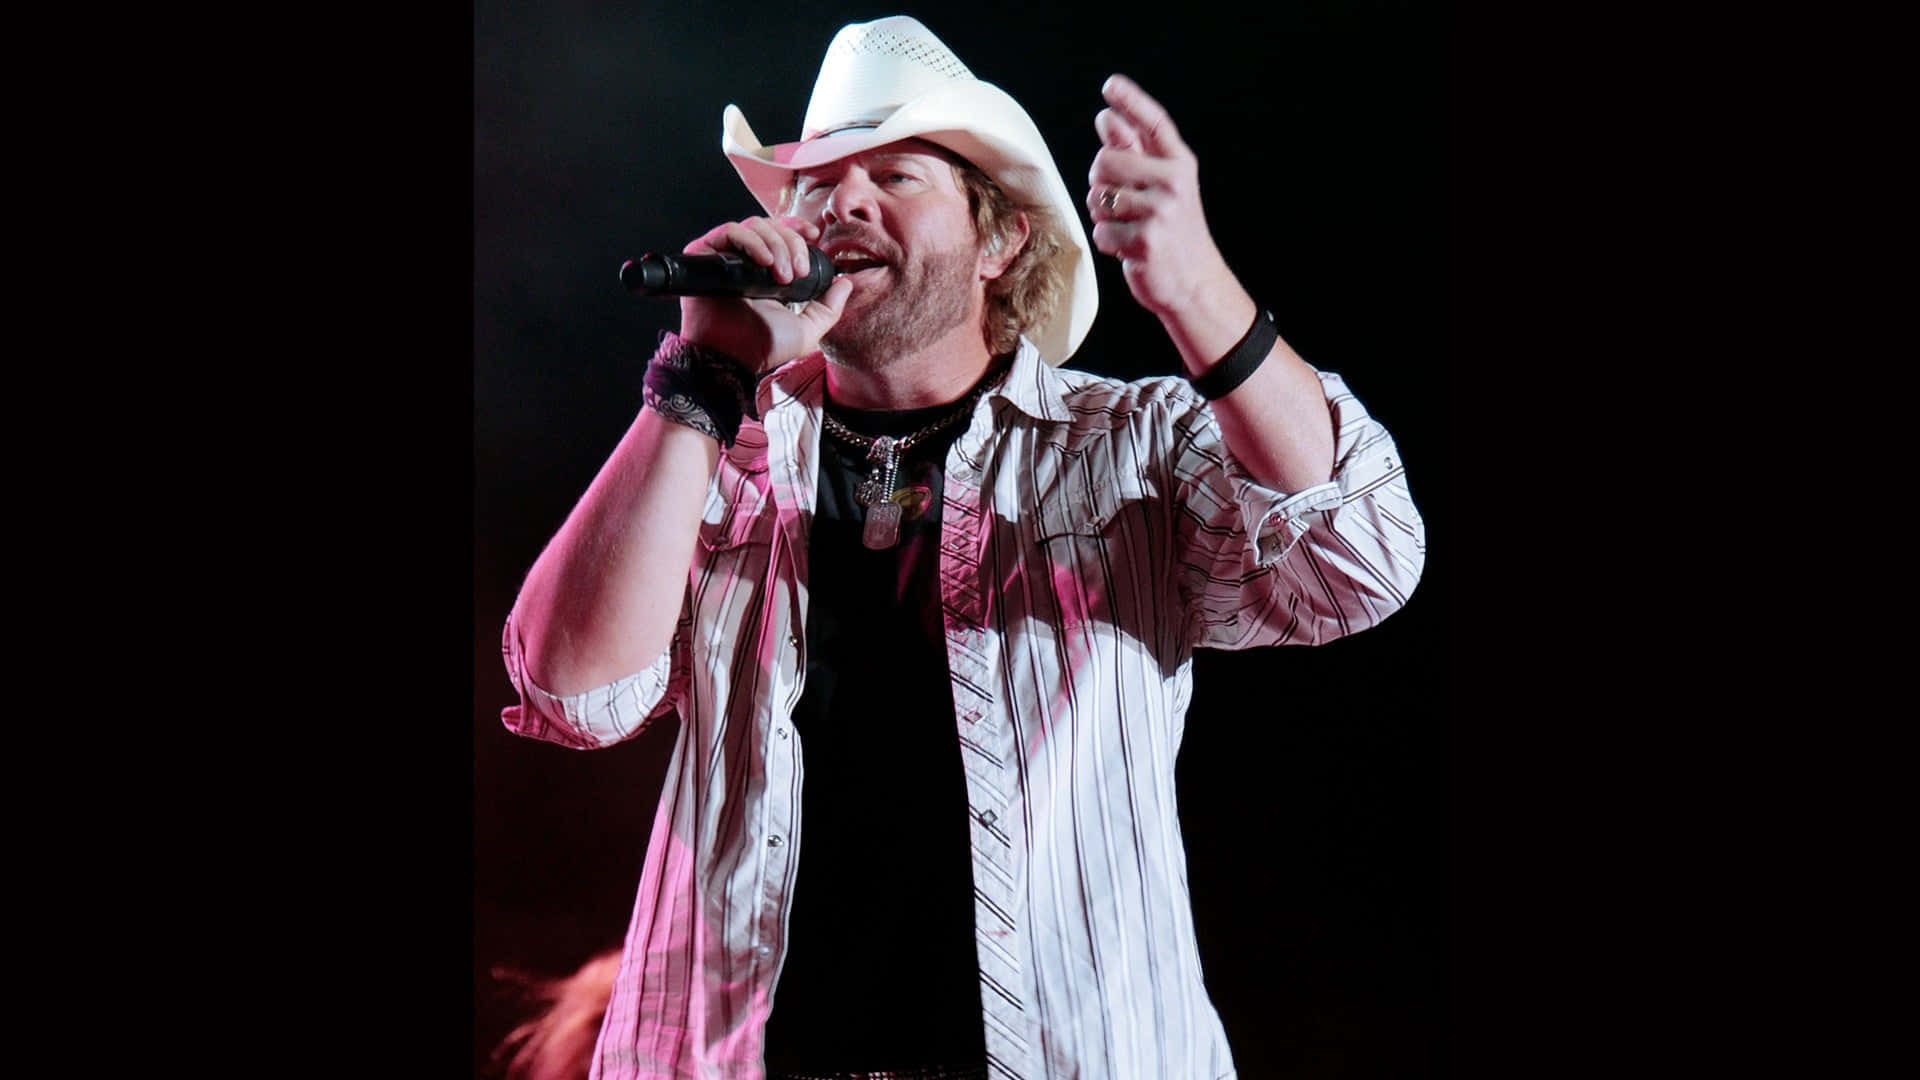 Country Singer Performance Live Concert Wallpaper